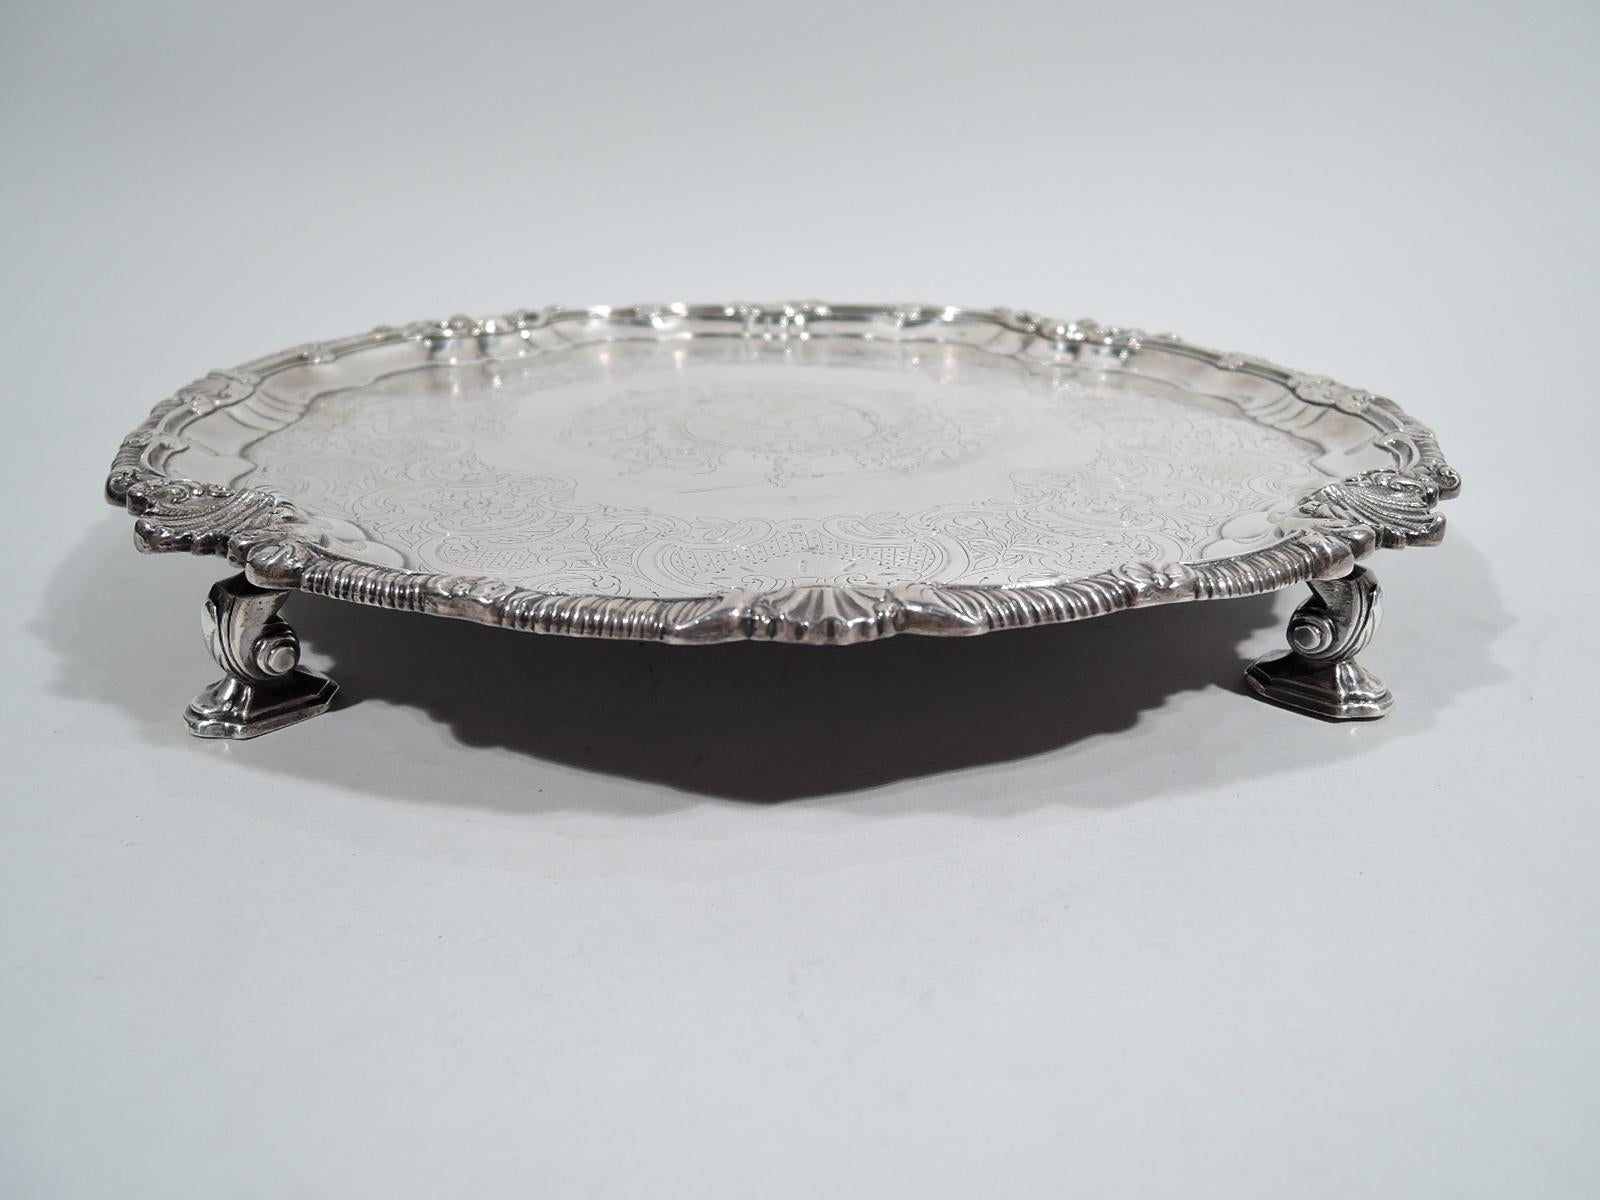 Irish Georgian sterling silver salver. Made by John Letablere in Dublin, mid-18th century. Gadrooned rim interspersed with shells and flower heads. Well center has engraved armorial with sword-bearing hand surrounded by flowers, leaves, and